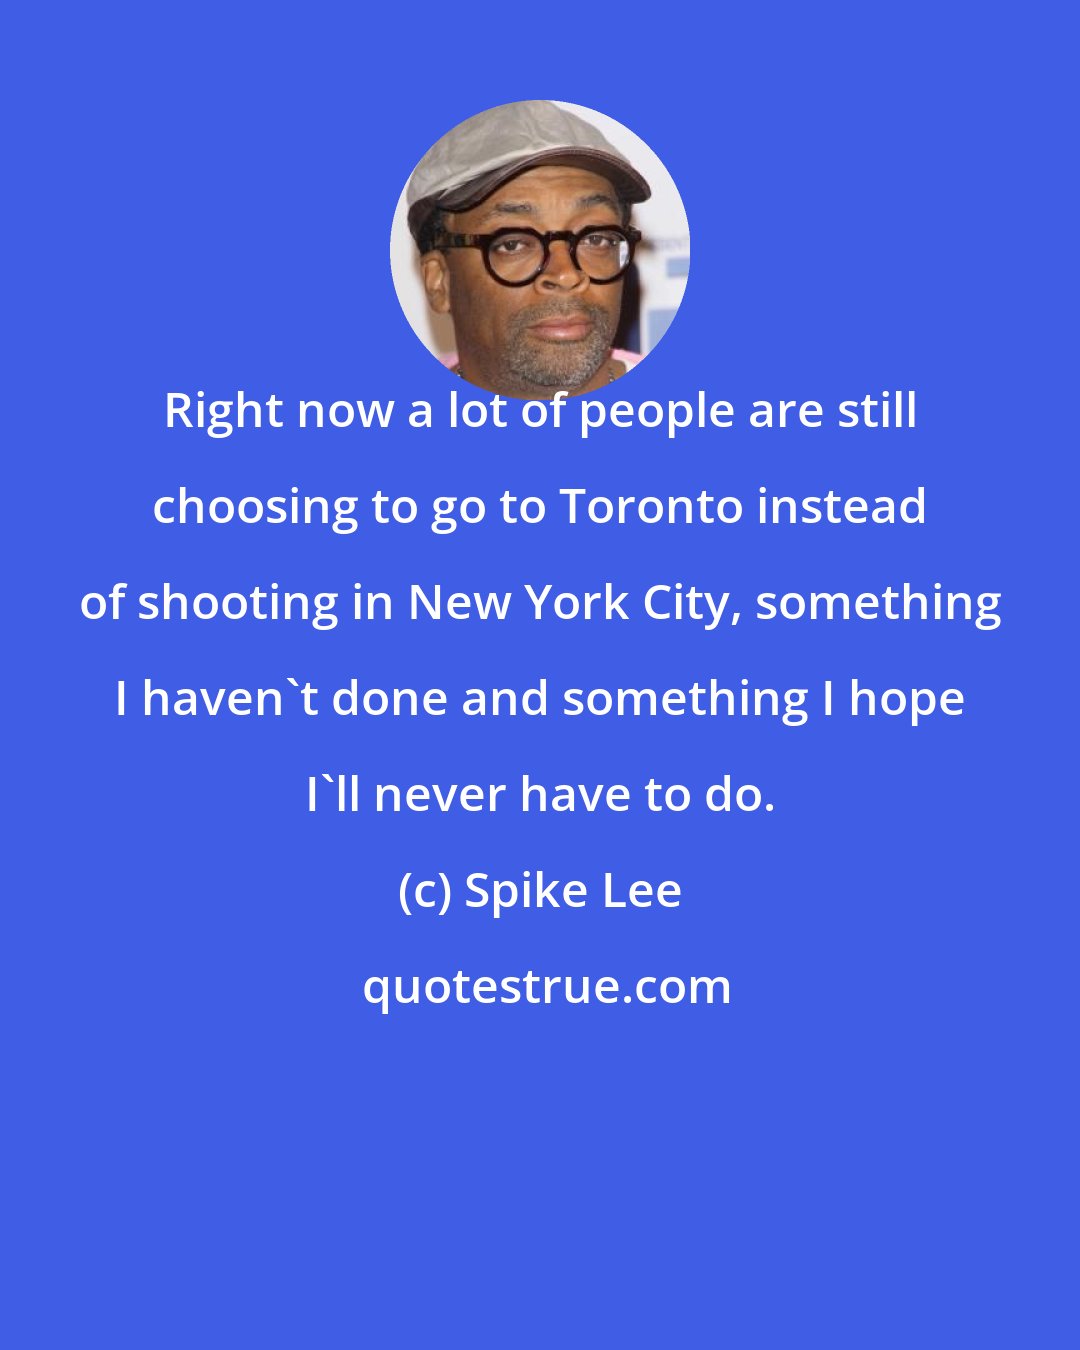 Spike Lee: Right now a lot of people are still choosing to go to Toronto instead of shooting in New York City, something I haven't done and something I hope I'll never have to do.